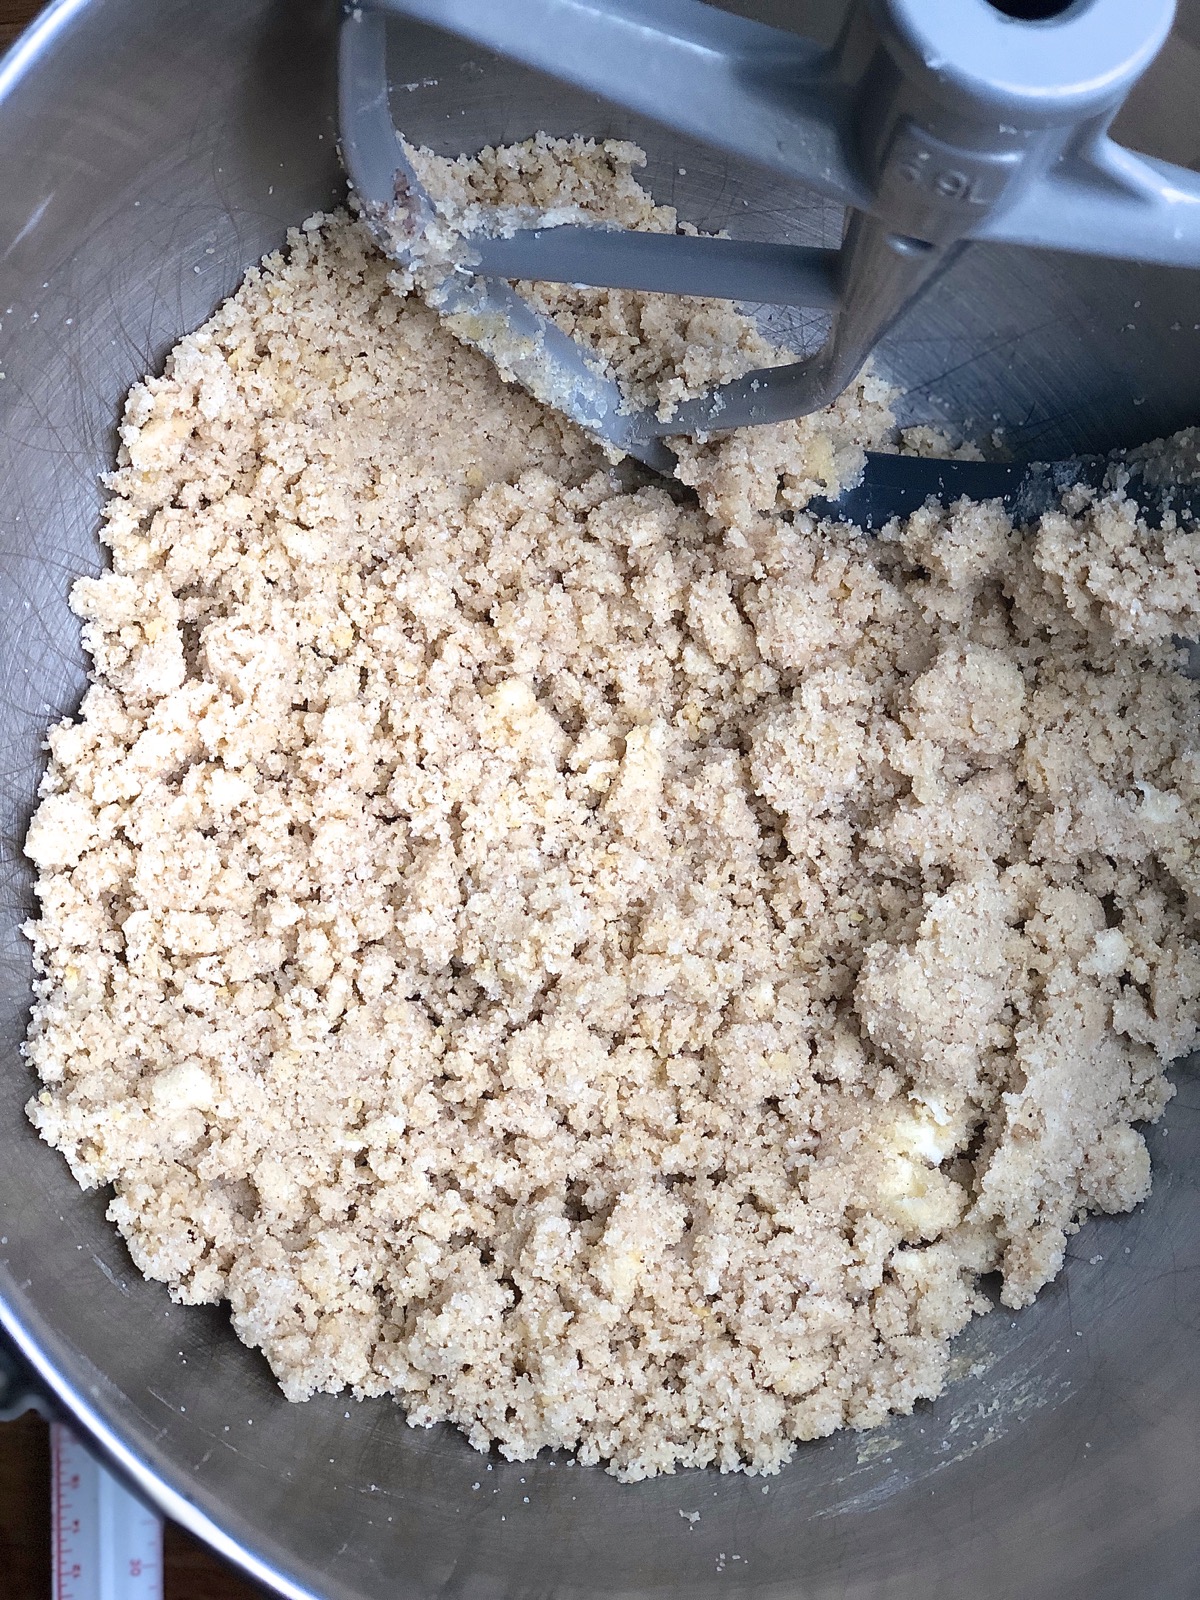 Some of the ingredients for apple cake mixed together in a bowl until crumbly.